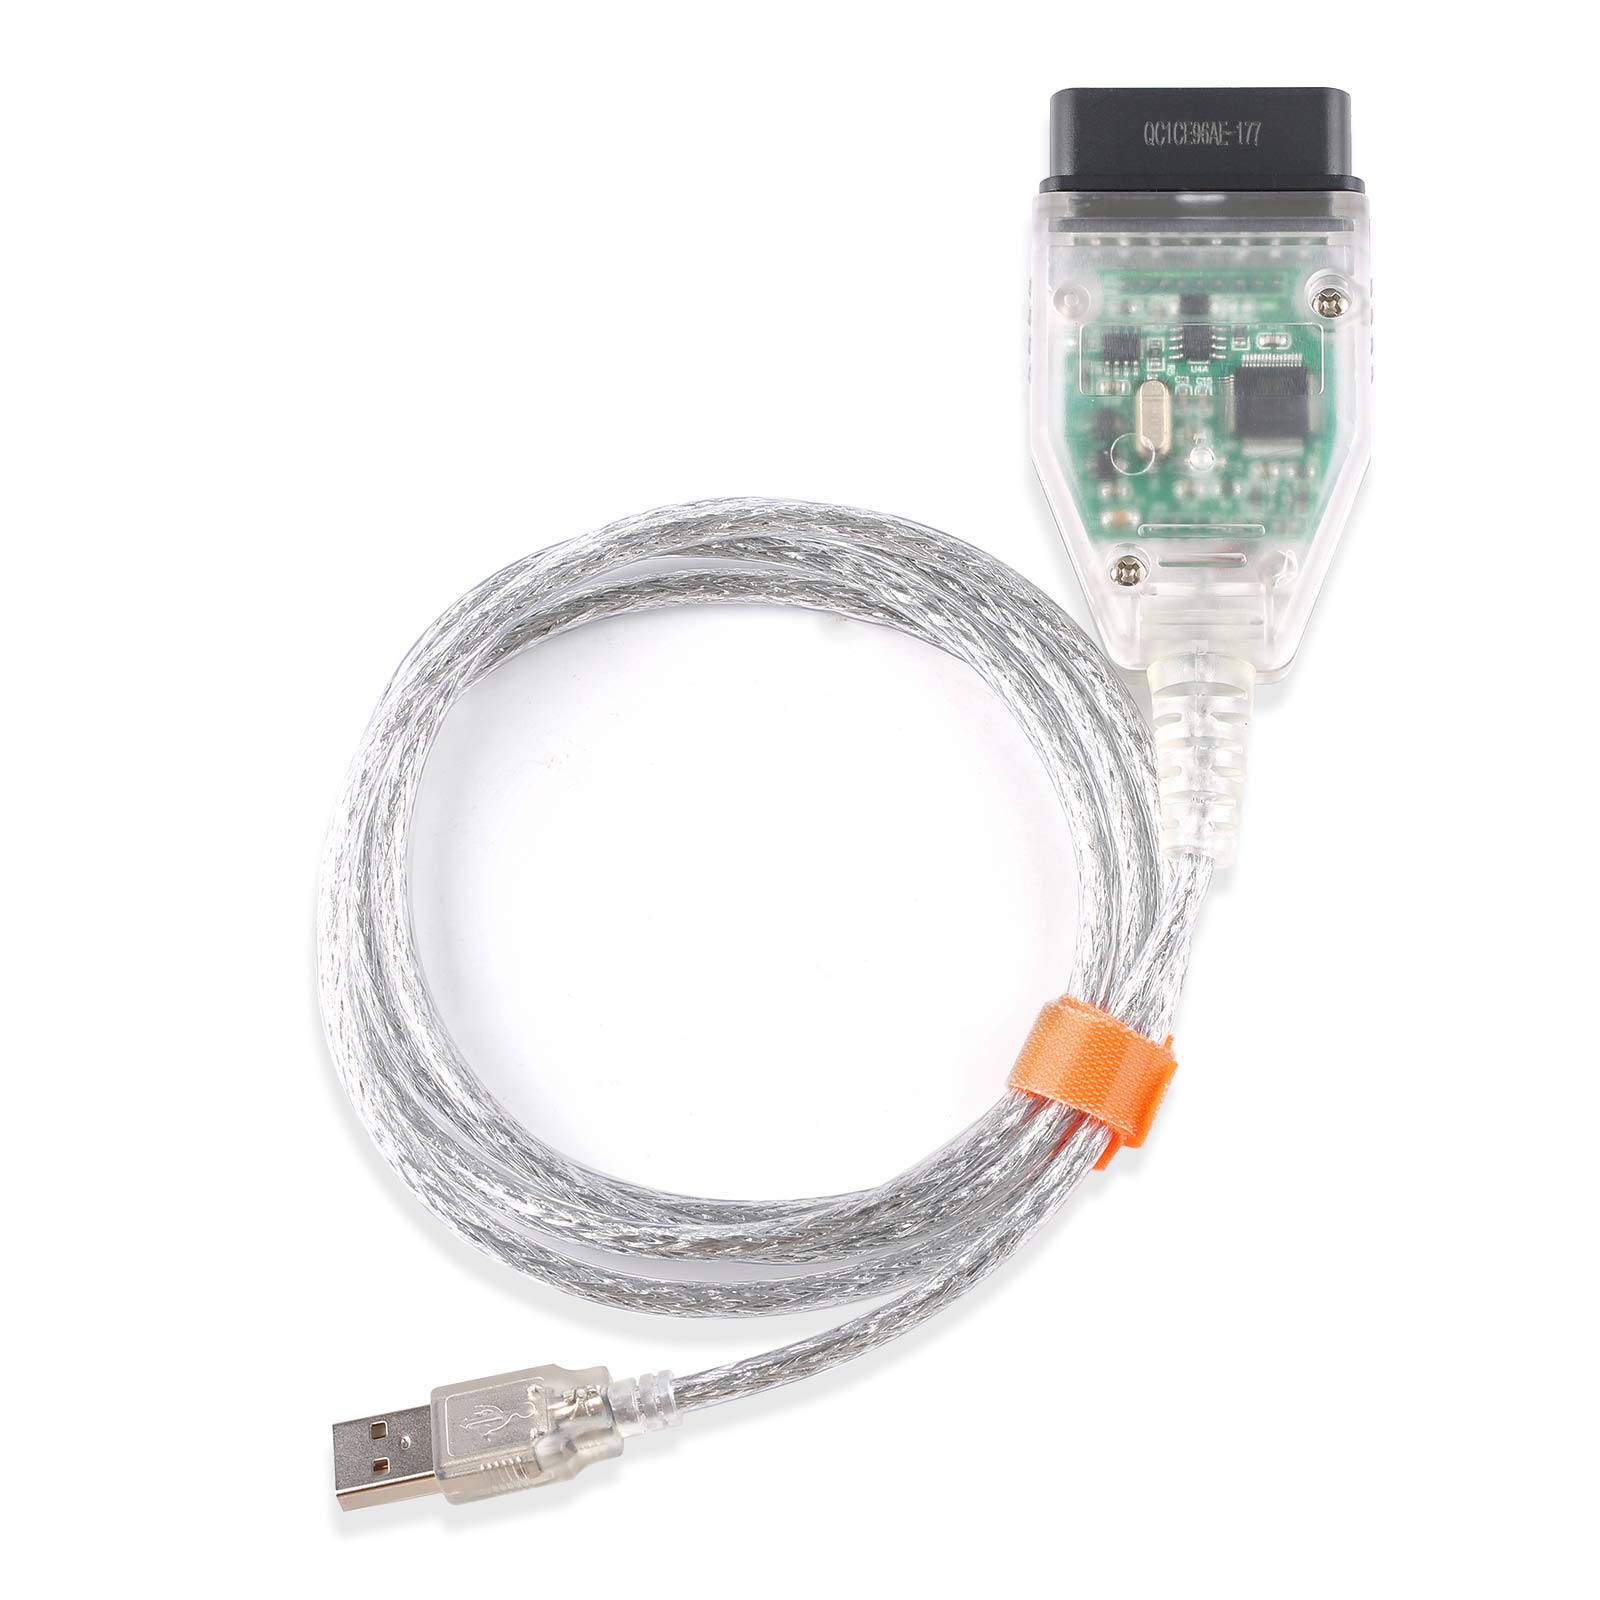 MINI VCI Single Cable package